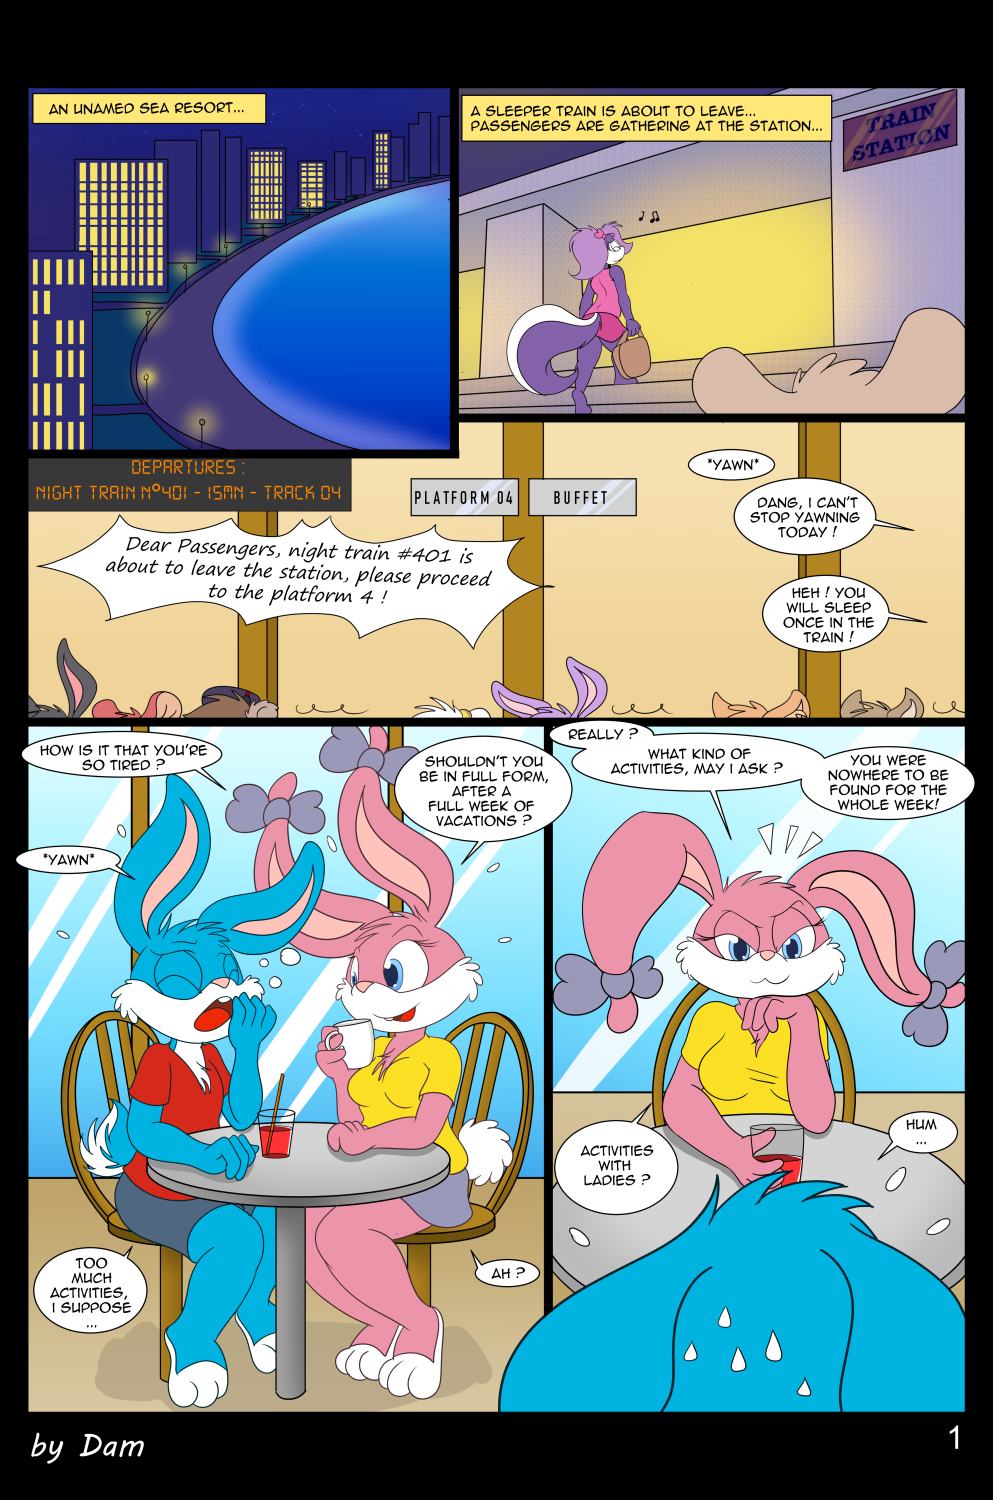 Most recent image: Toons on a train - p001-EN